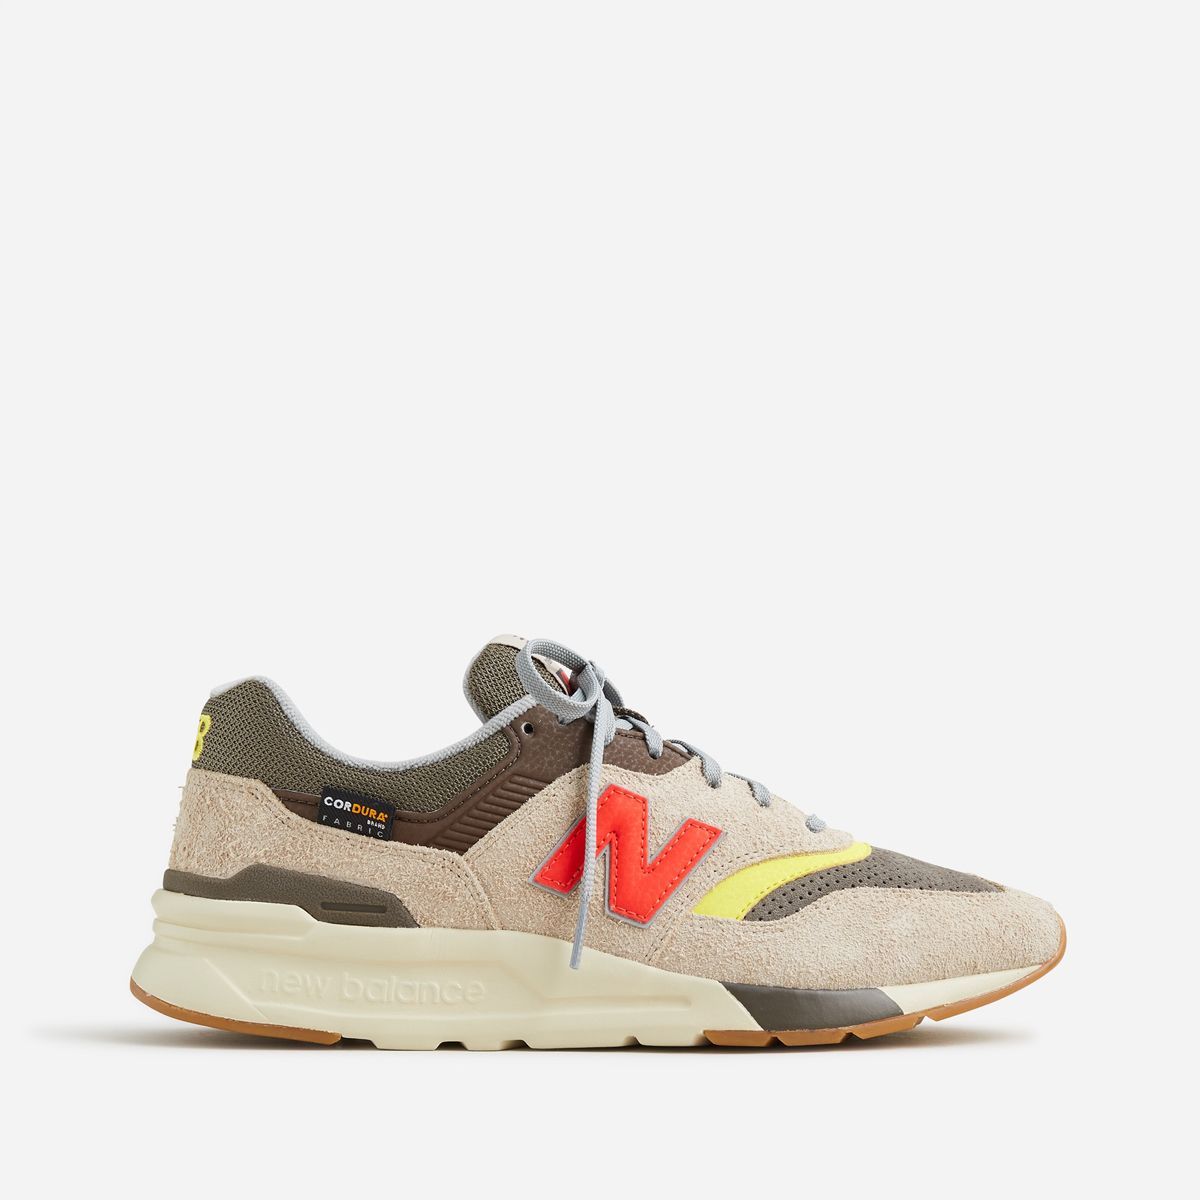 J.Crew x New Balance 997H Sneakers: Release Date, Price